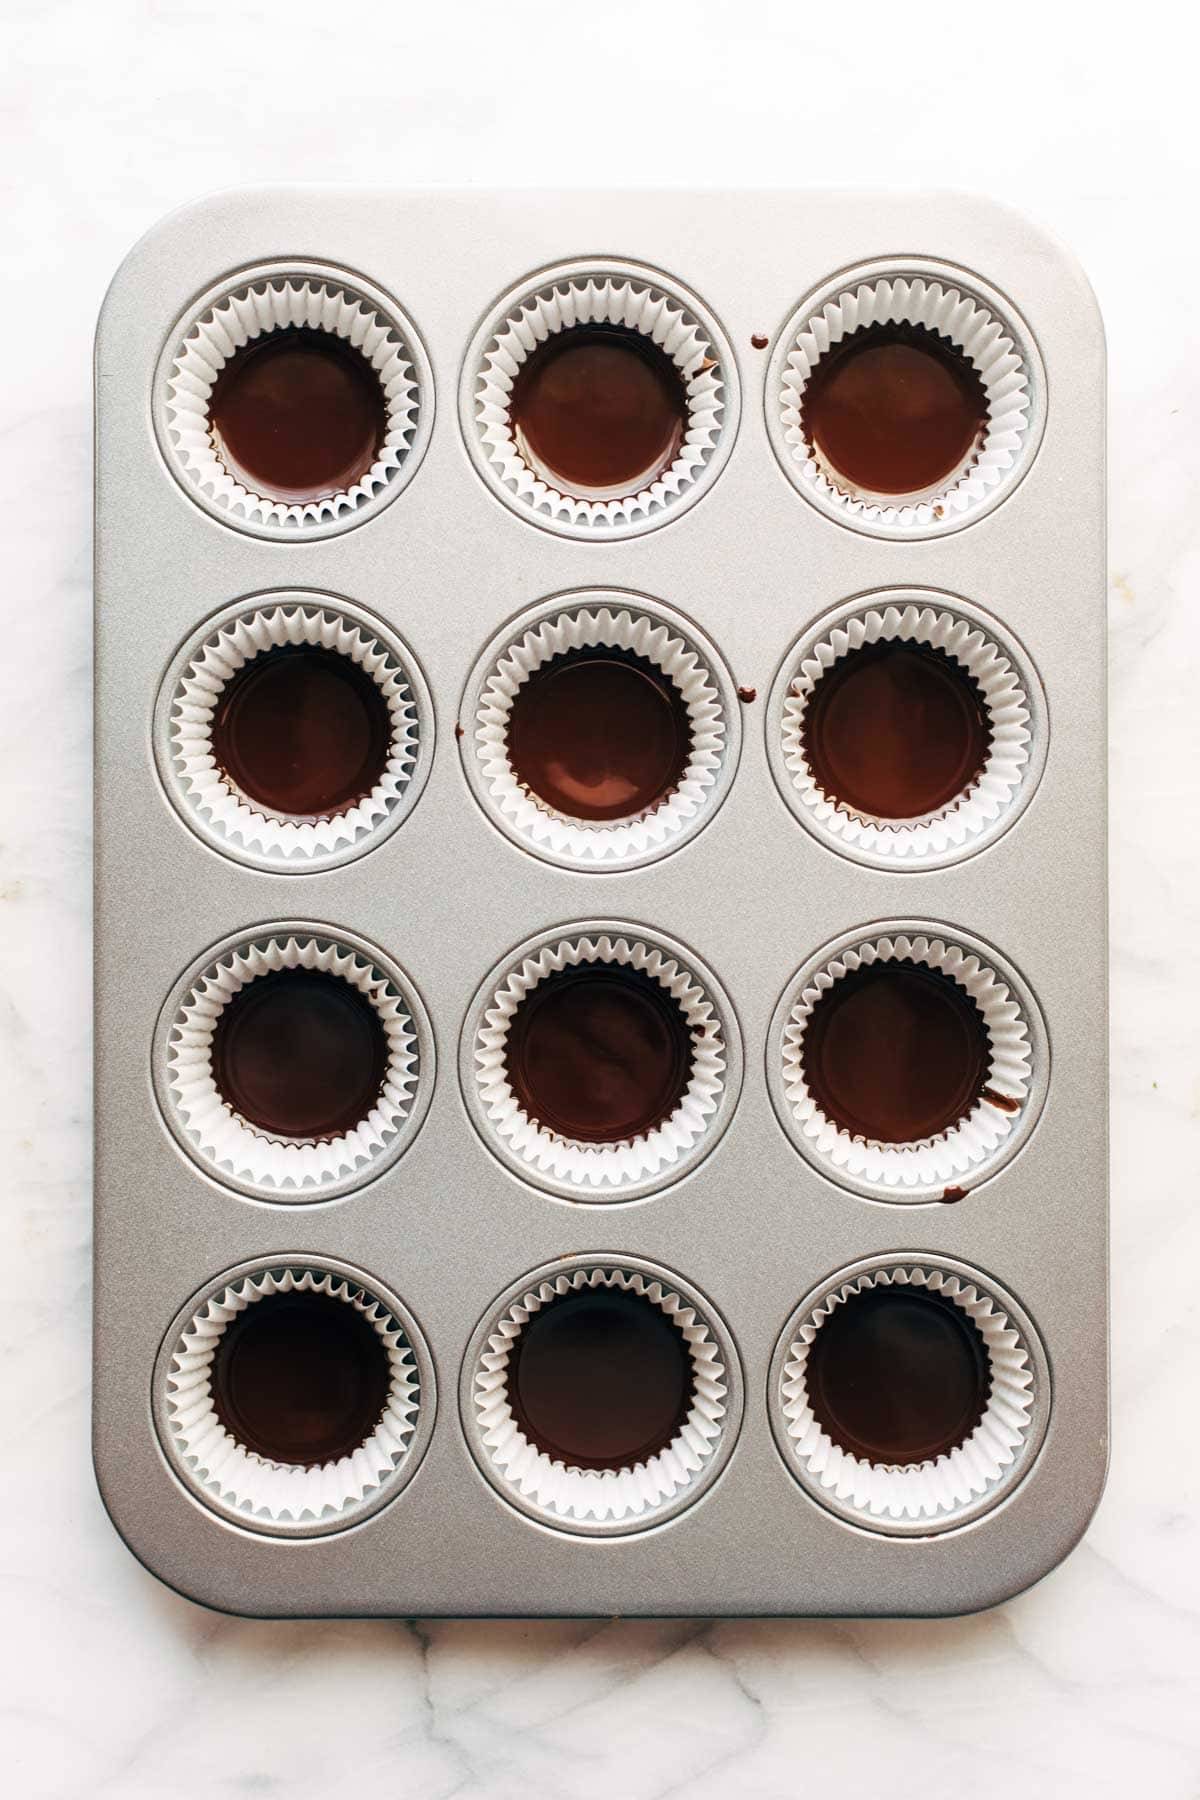 Almond butter cups chocolate in muffin pan.